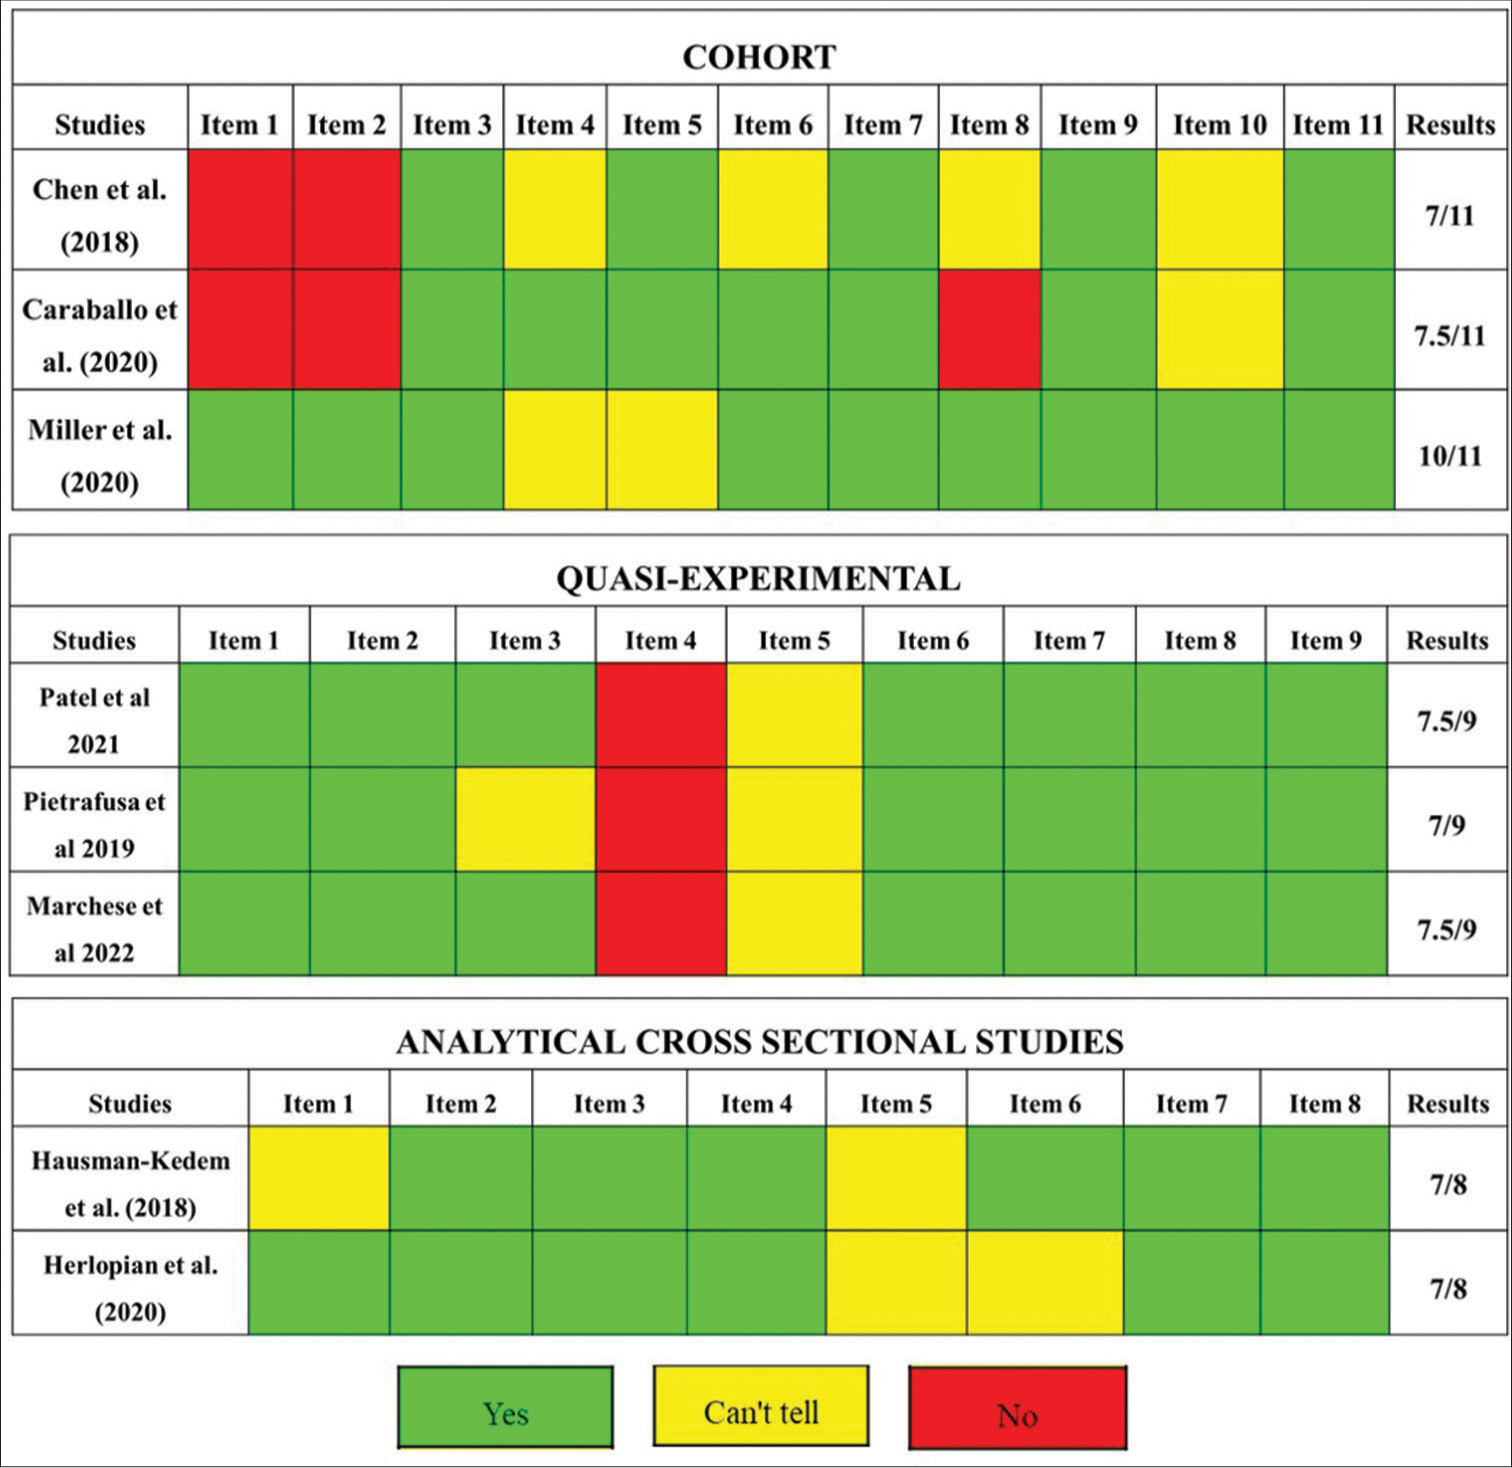 Evaluation of quality of included studies by Joana Briggs Institute checklist. Green: 1 point, Yellow: 0.5 points, Red: No point. In order to evaluate the quality of the included studies, these were evaluated with items that allow to know their quality. Each item has a question. Each question answered correctly is equivalent to 1 point and is colored green, answered partially is equivalent to 0.5 point and is colored yellow, and not answered is equivalent to no point and is colored red.